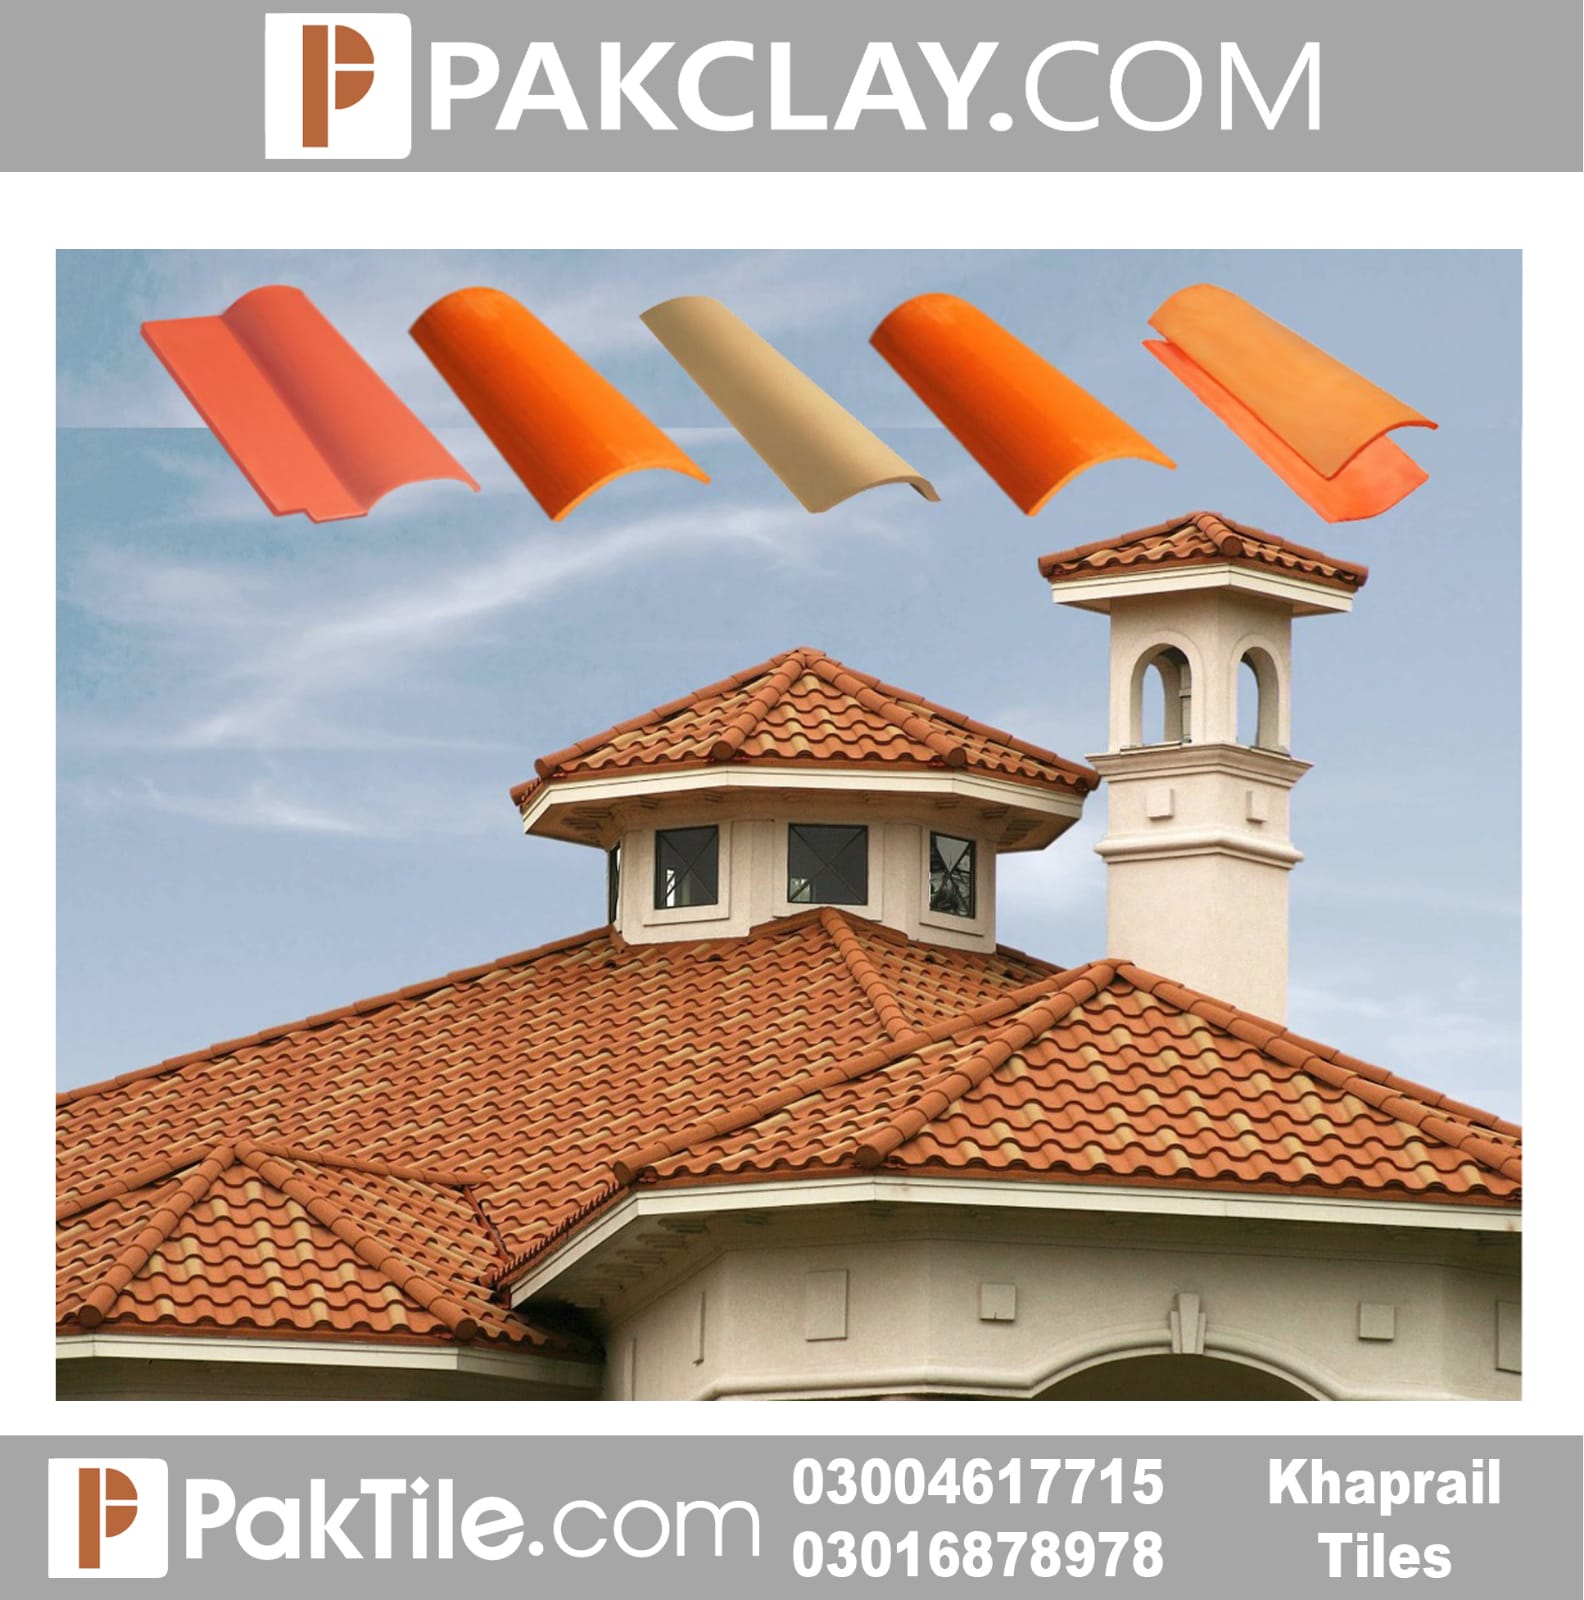 Khaprail Tiles Price in Islamabad